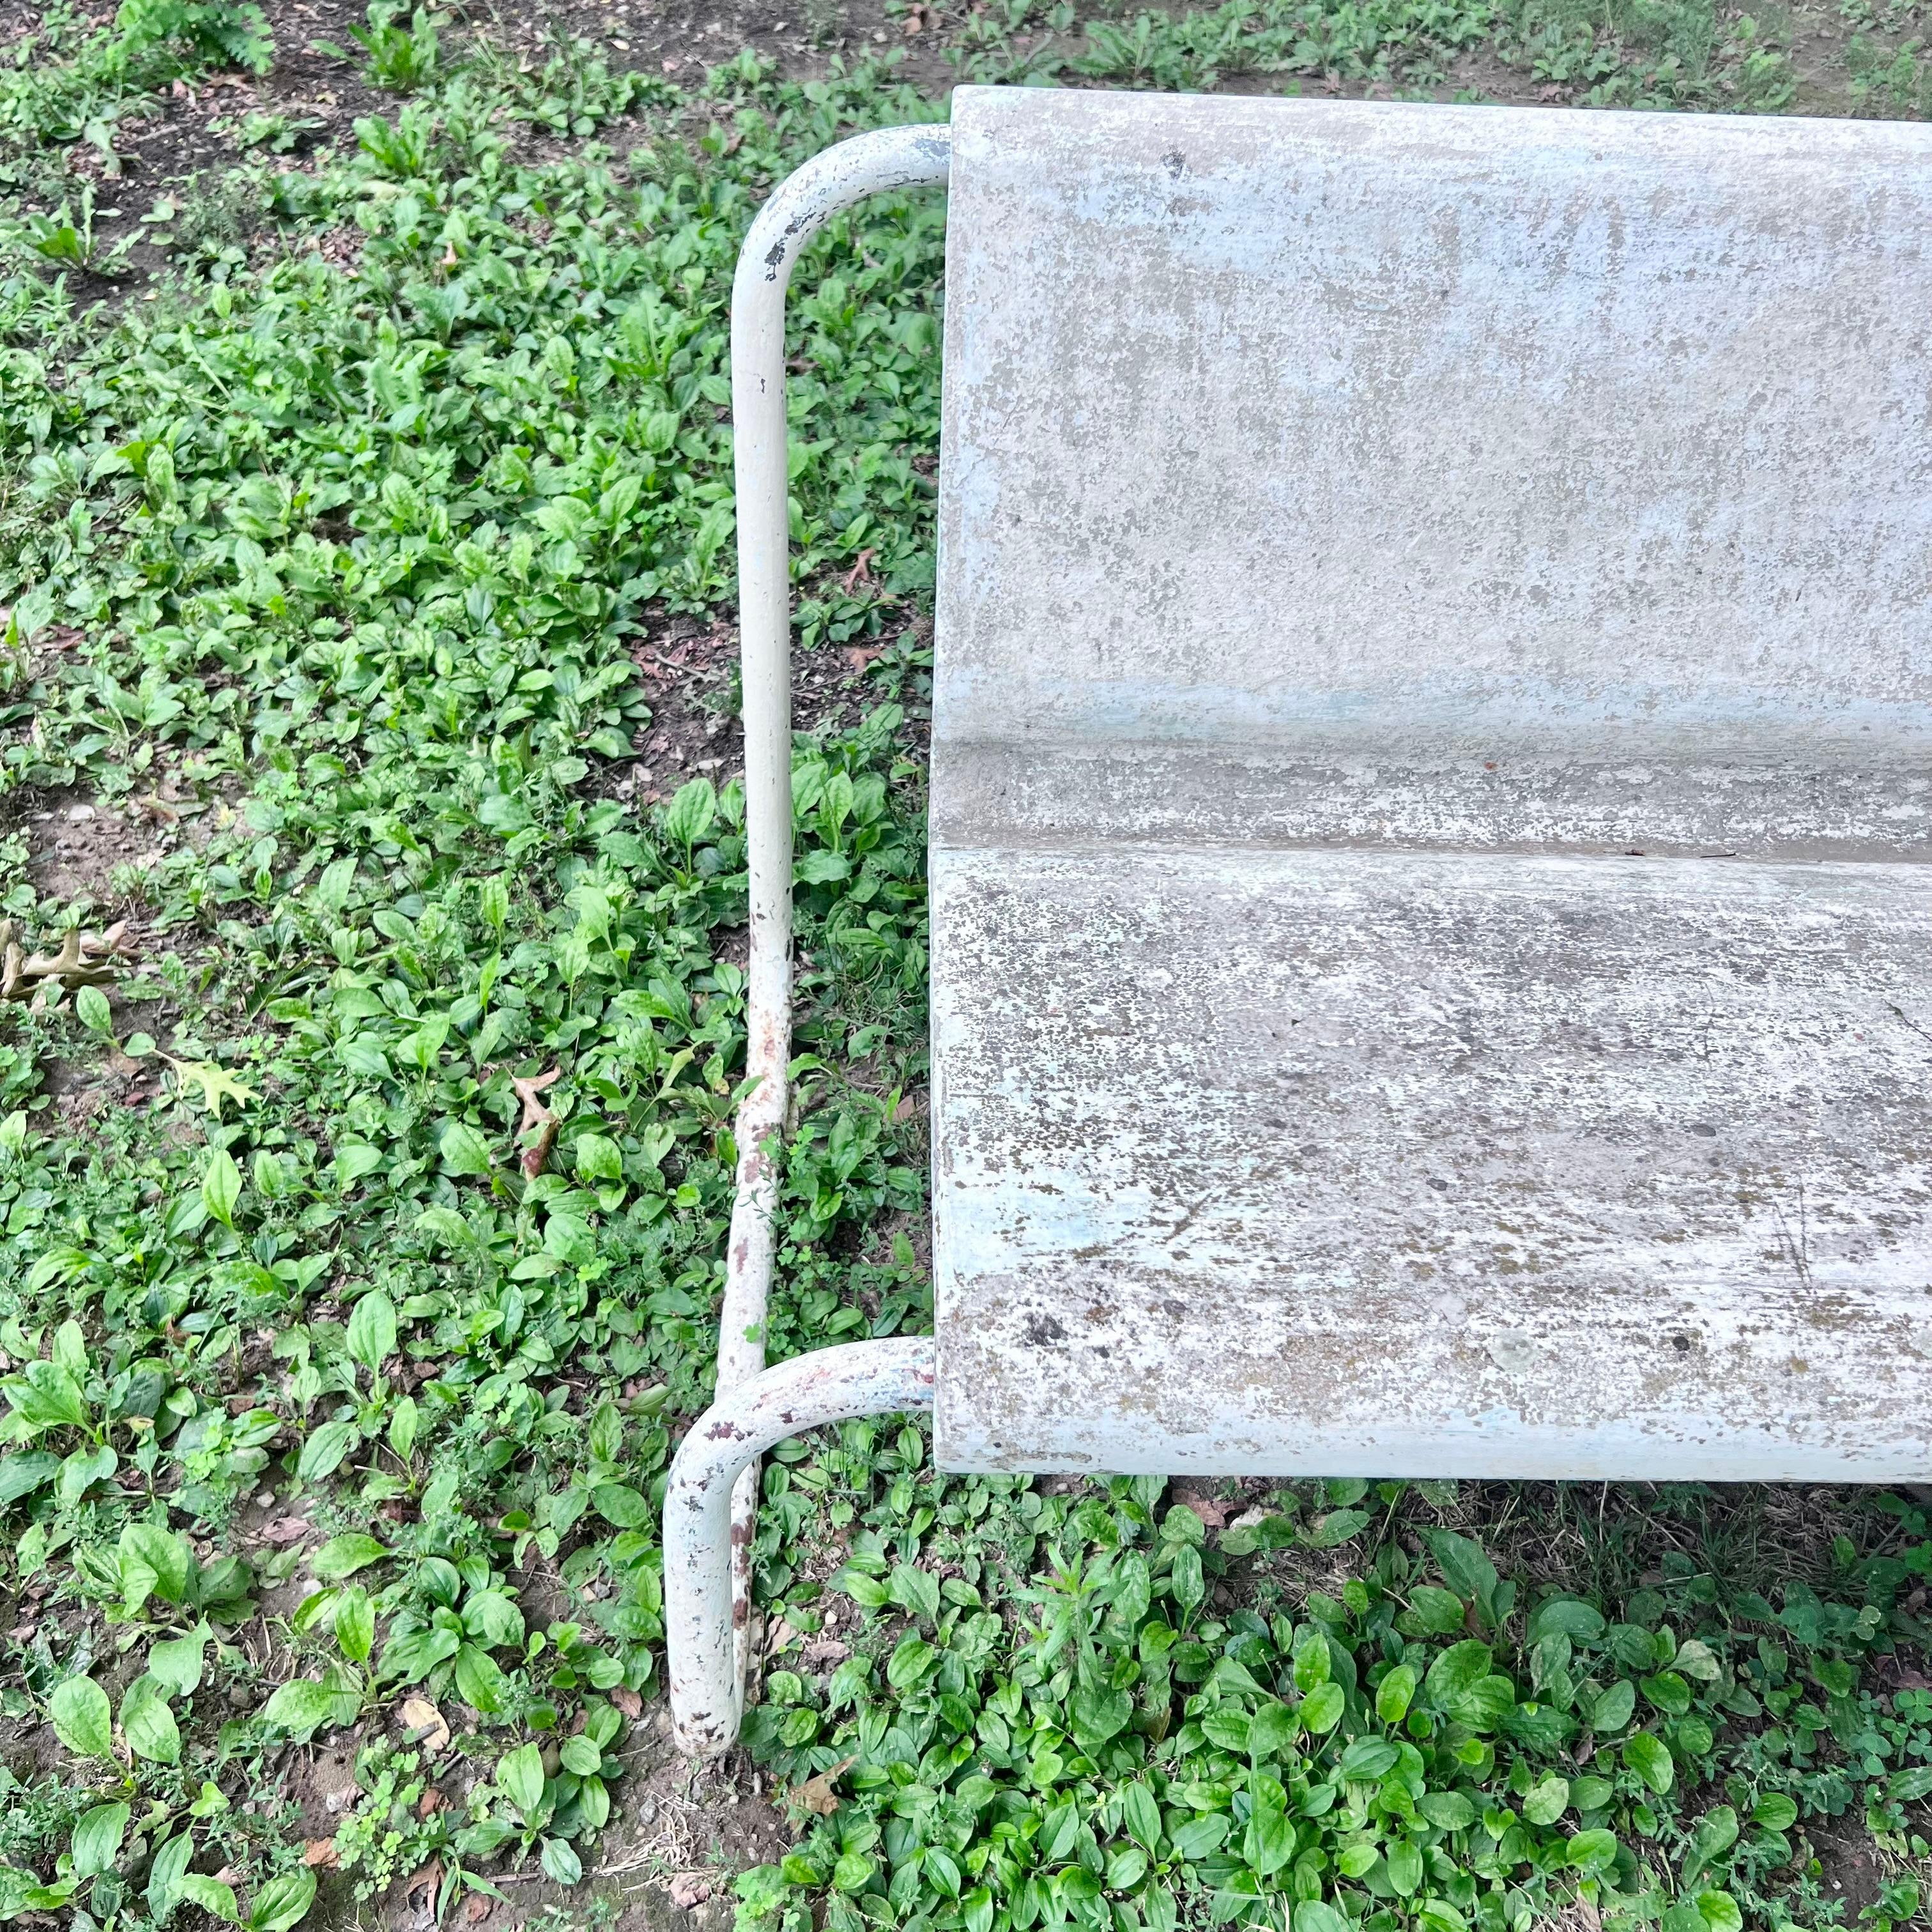 Swiss Willy Guhl Concrete and Steel Floating Bench, 1960s Switzerland For Sale